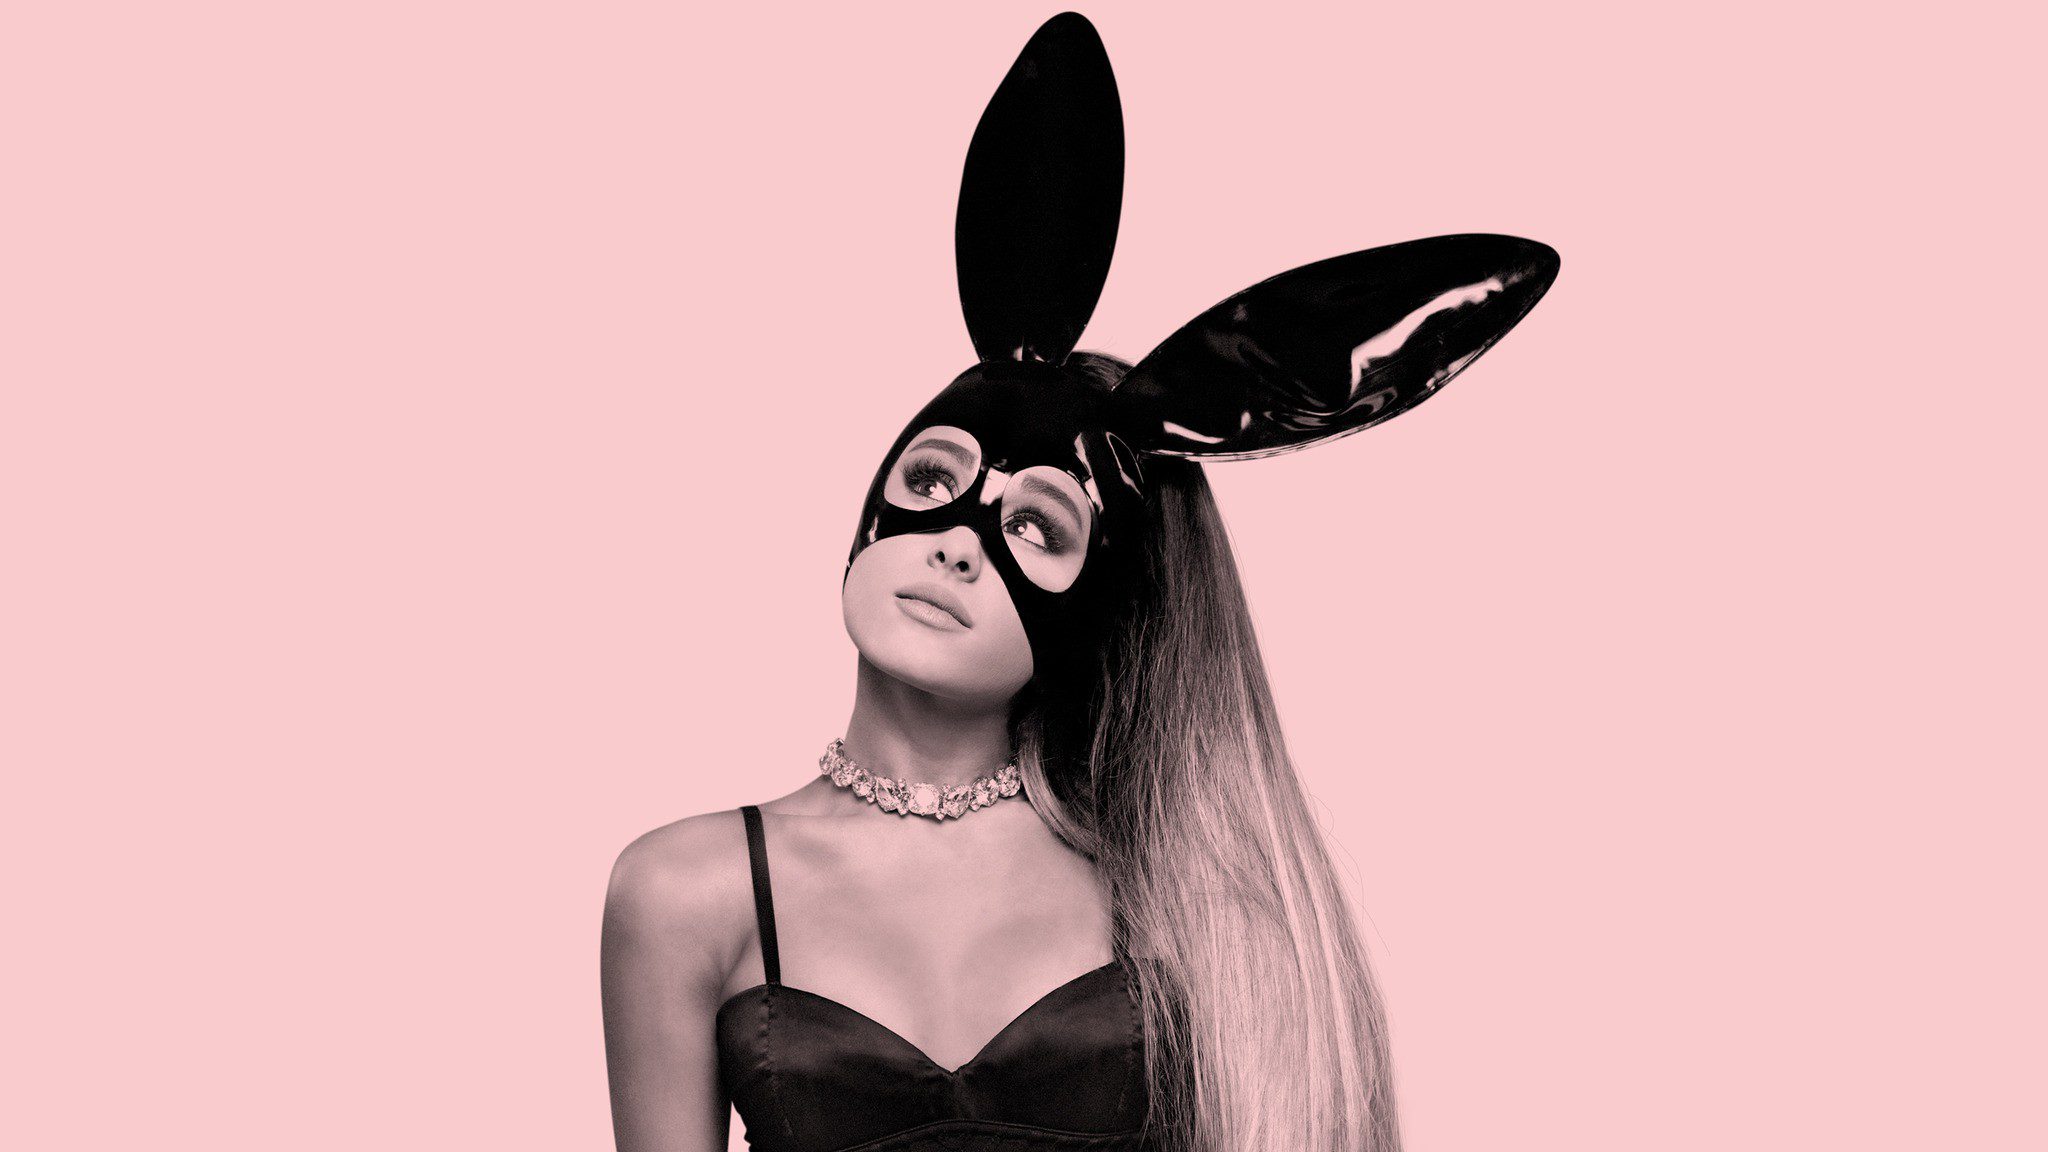 Win tickets and backstage passes to Ariana Grande in Final Fantasy Brave Exvius